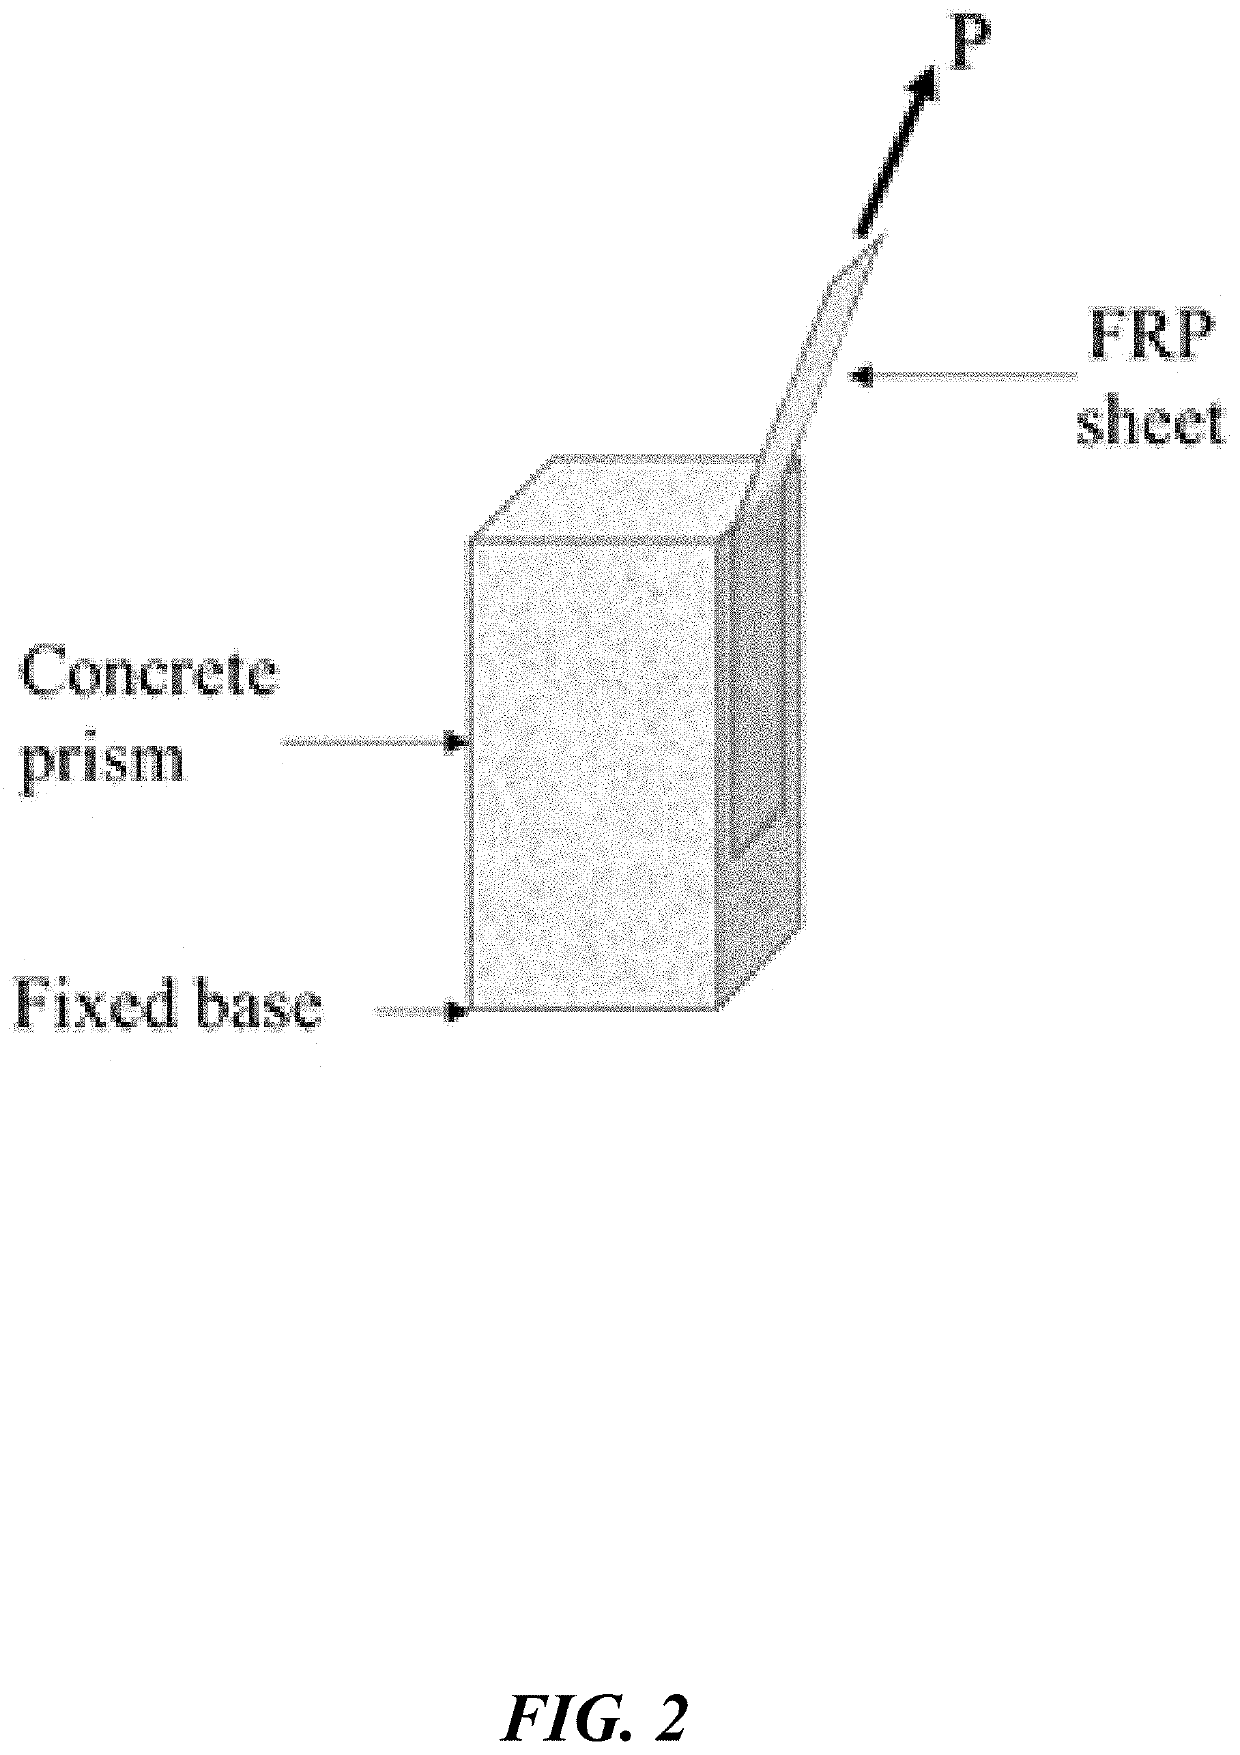 Universal debonding test apparatus for carbon fiber reinforced polymer – concrete system and method for sequential multi-testing